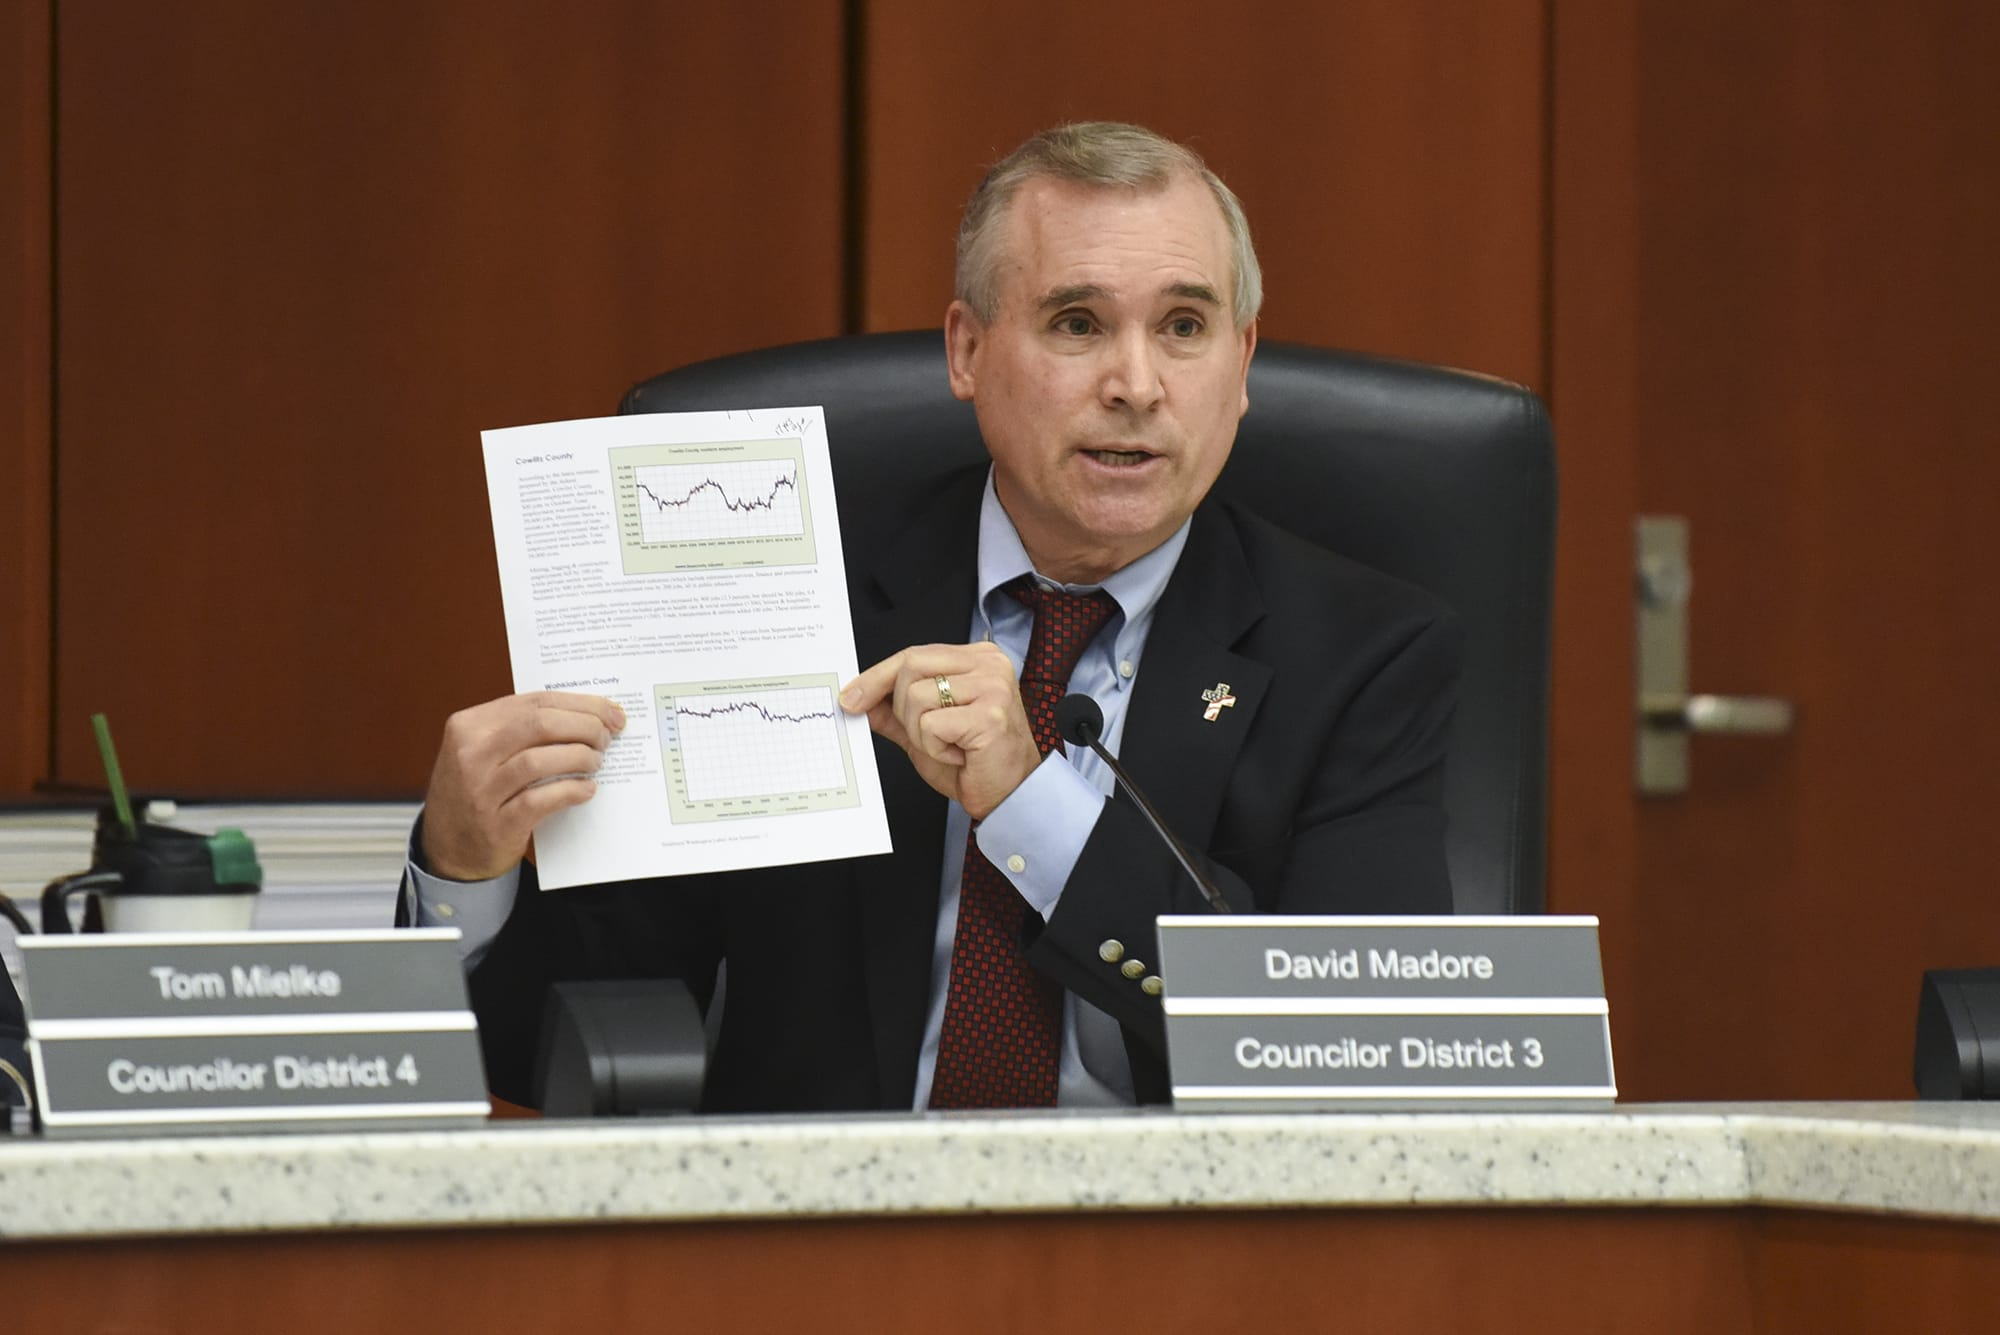 County councilor David Madore discusses the fee waiver program during the final county council hearing of the year at the Clark County Public Service Center, Tuesday December 13, 2016.